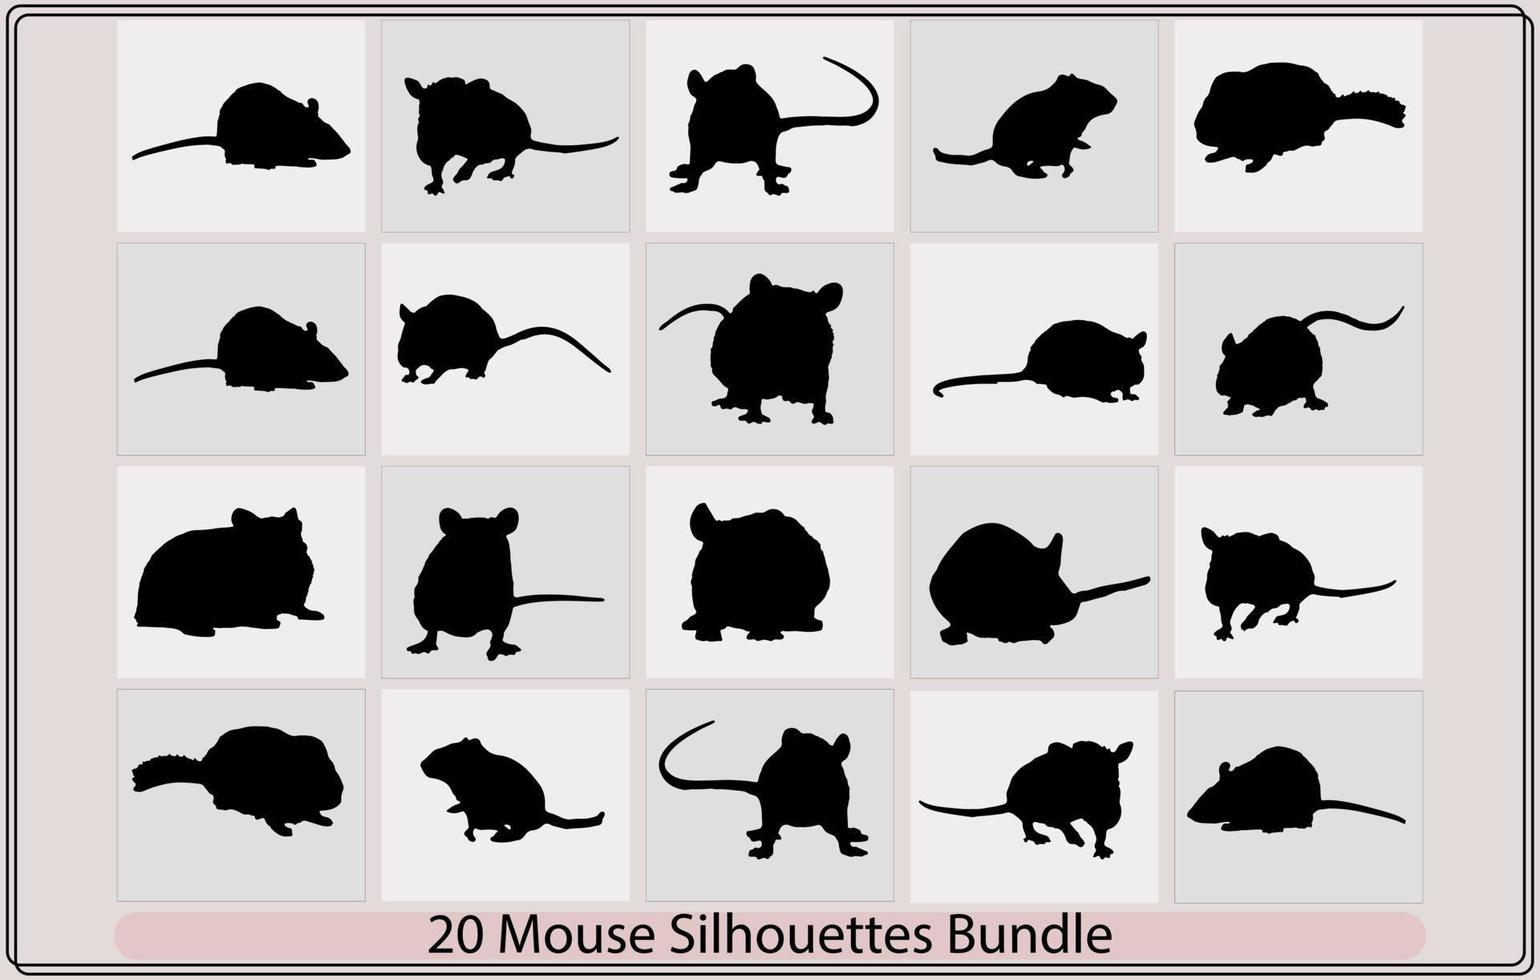 Rat and mouse silhouette,silhouette of a realistic rat,vector silhouette of the mouse,Mice Silhouettes,set of silhouettes Mouse Rat vector